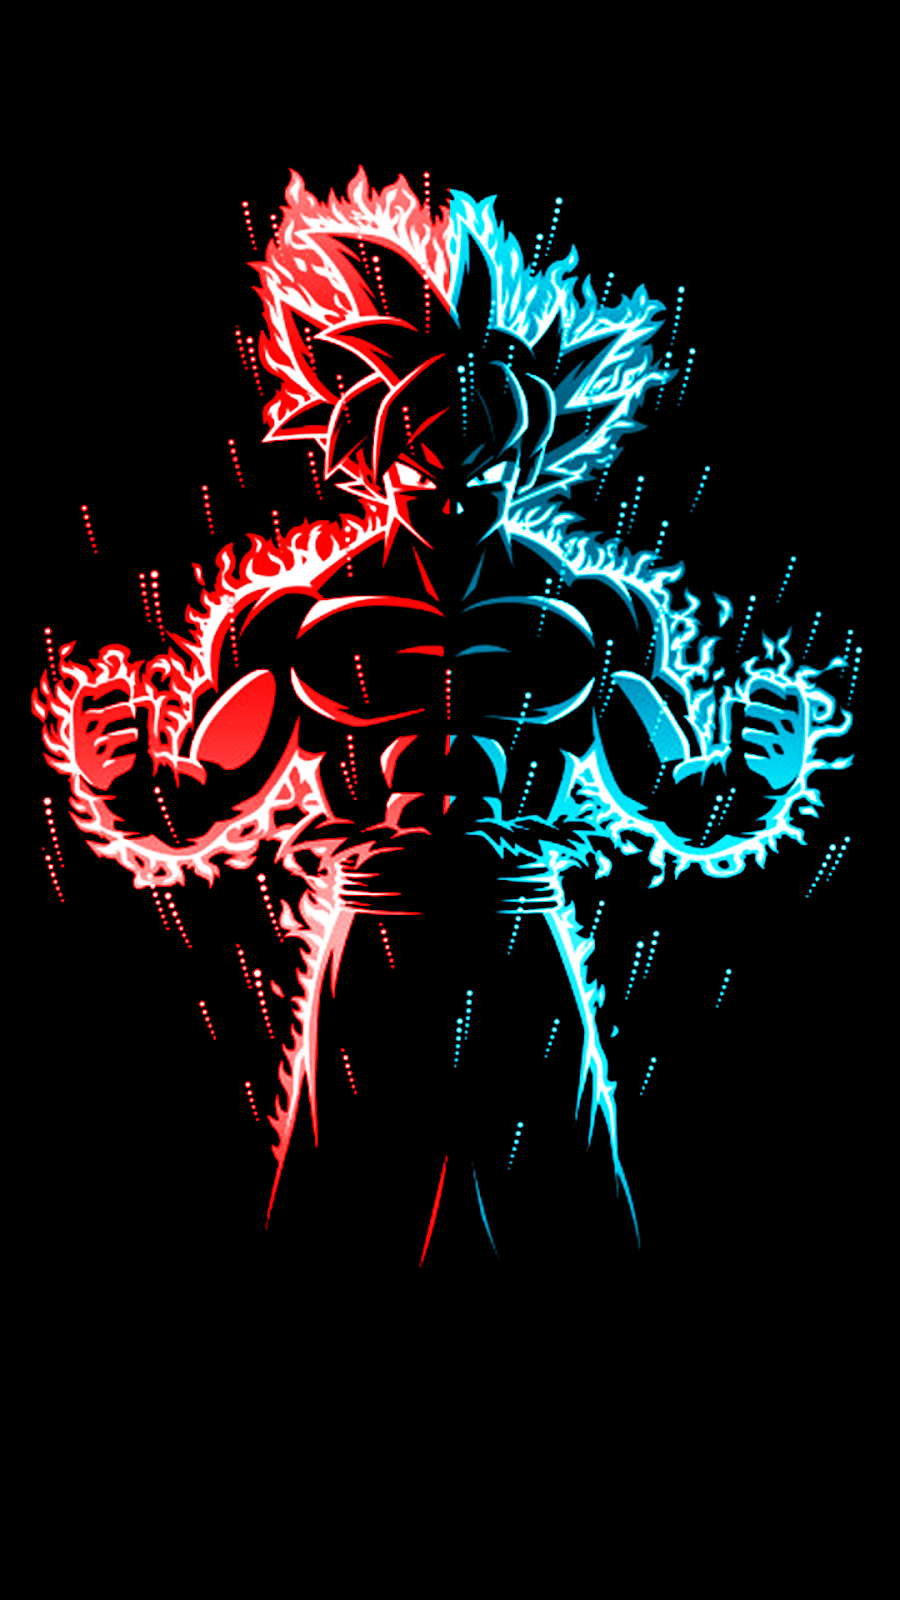 My Collection Of Amoled Background II (Dragon Ball Background)